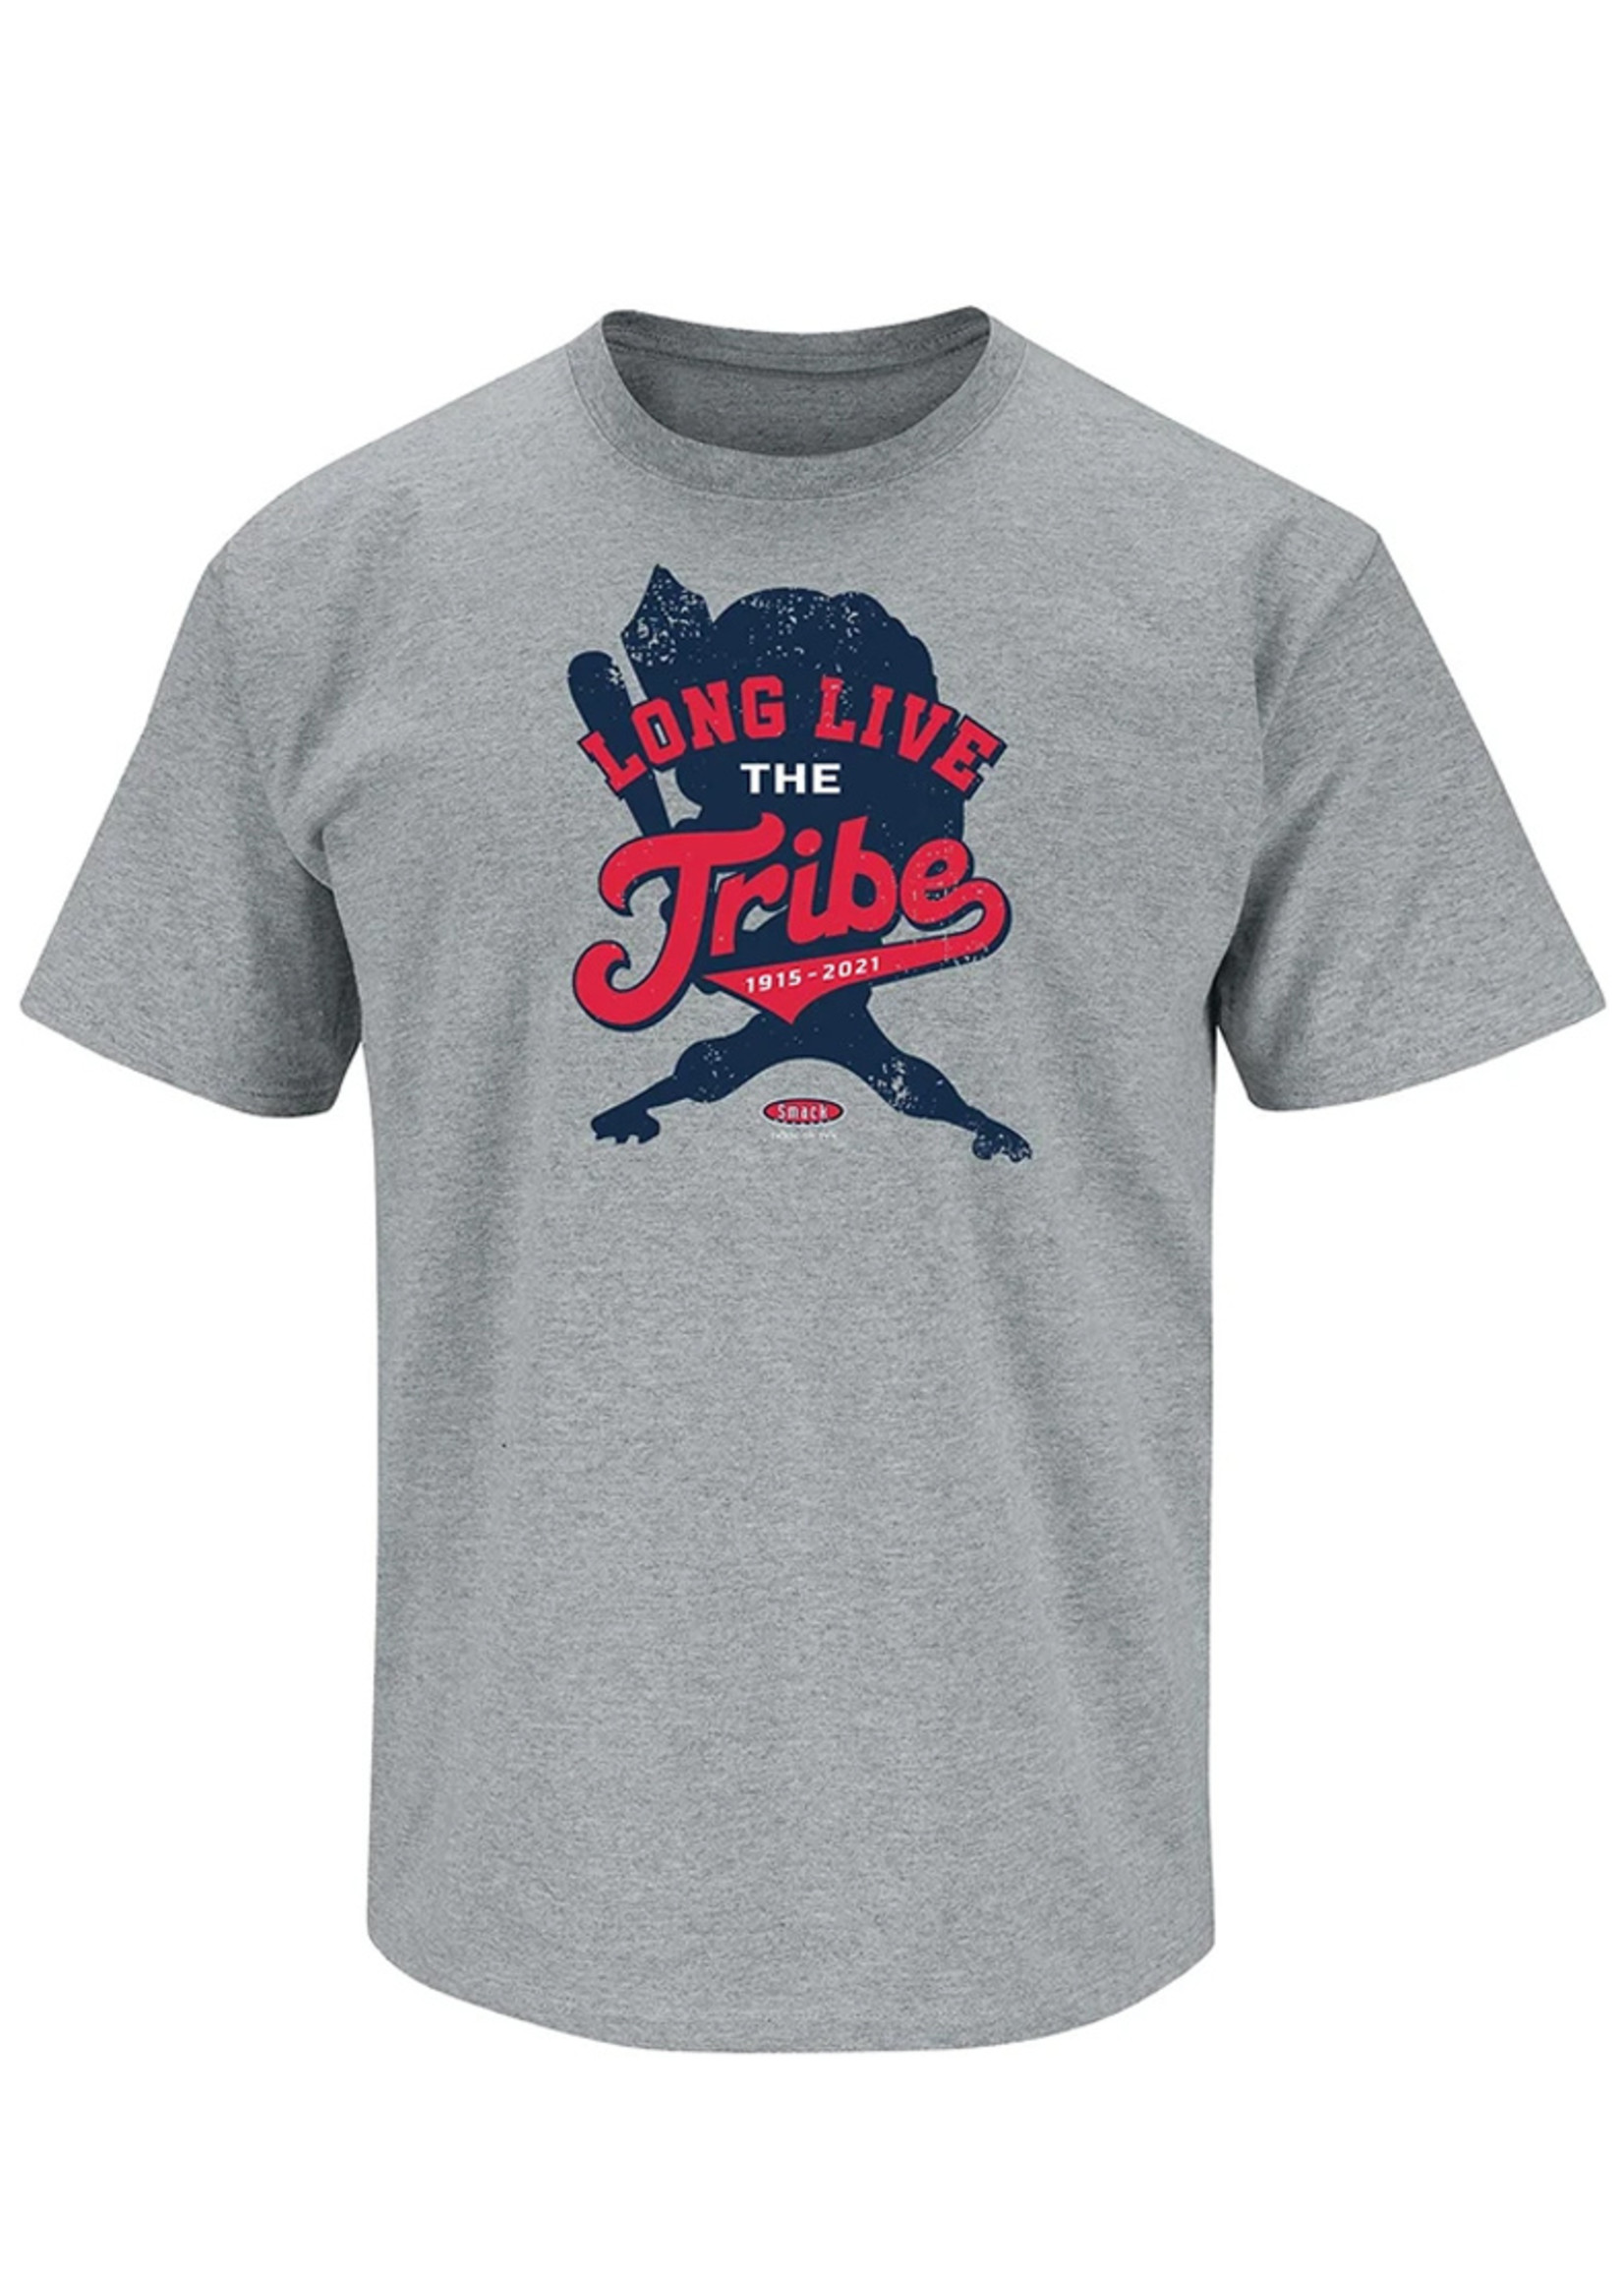 Cleveland Indians Shirt, Long Live The Chief